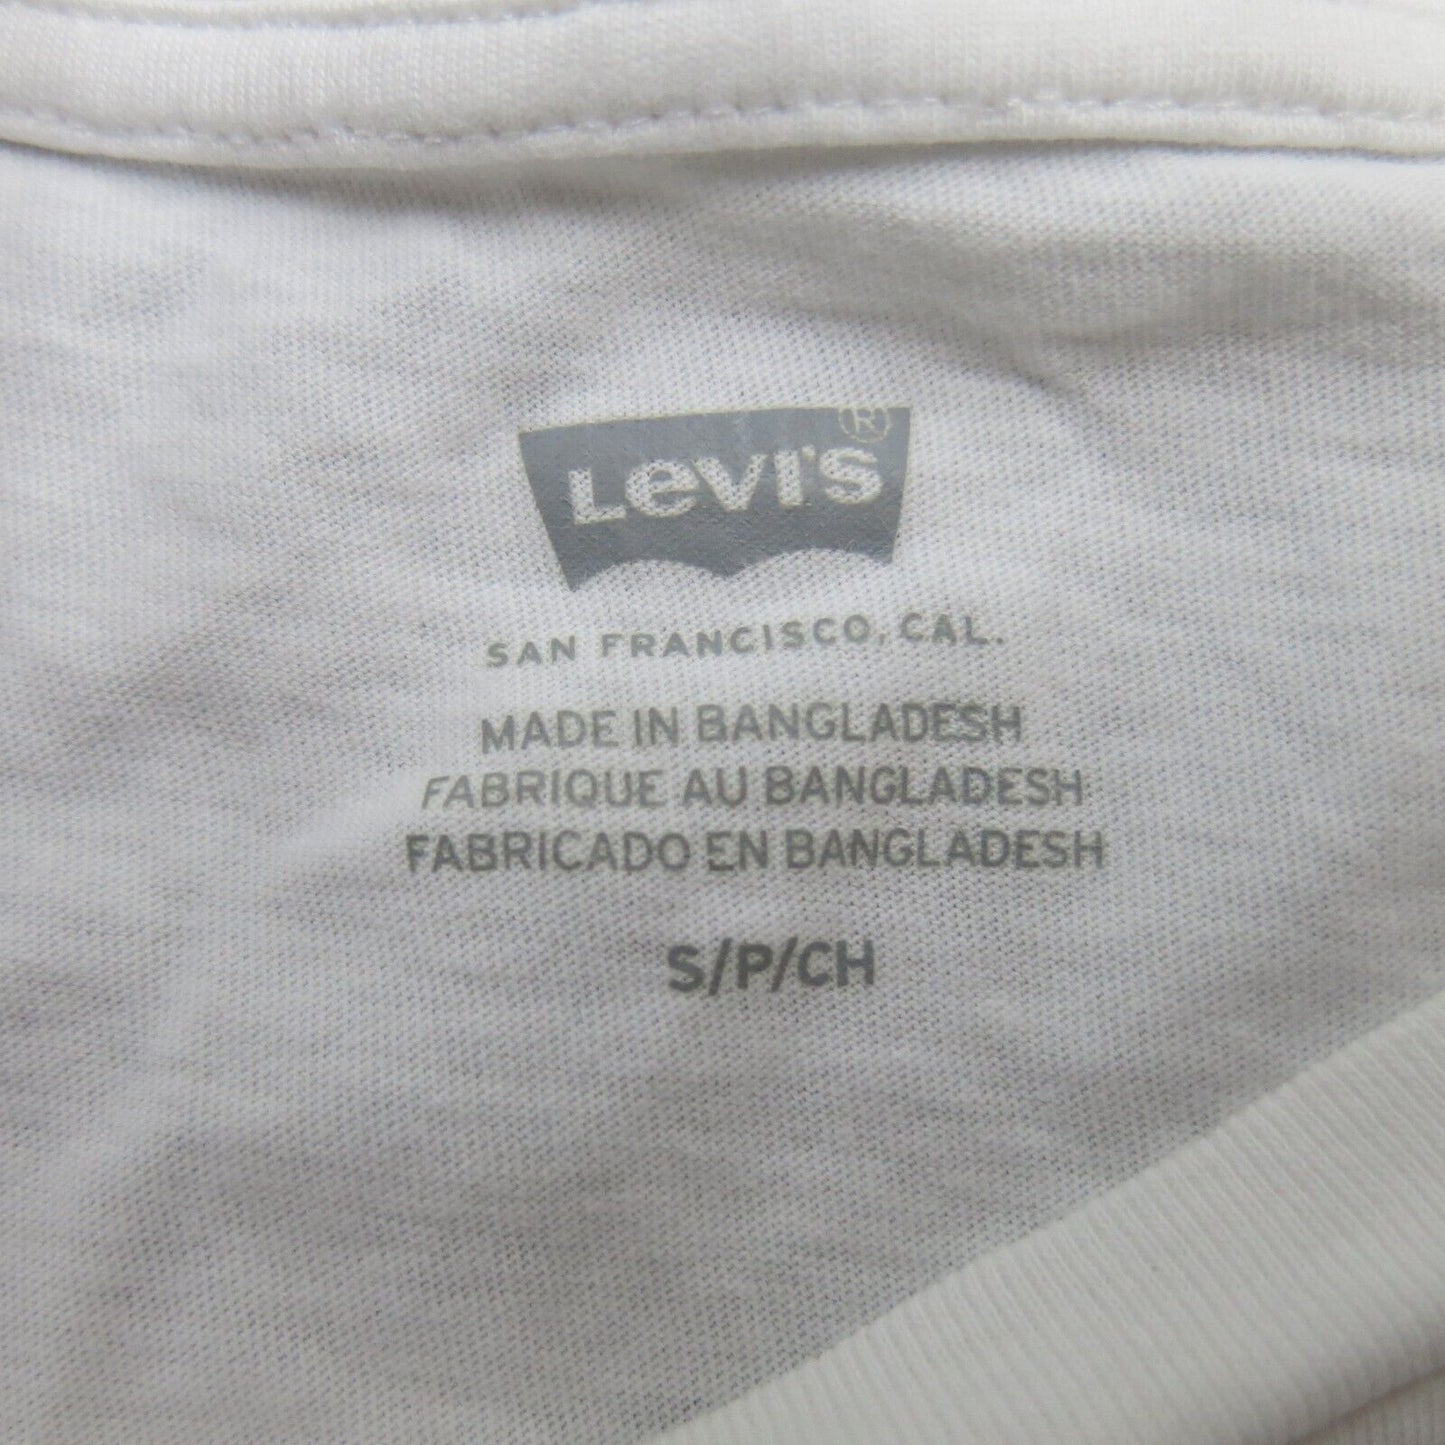 Levis Womens Pullover T Shirt Short Sleeves Crew Neck White Size Small